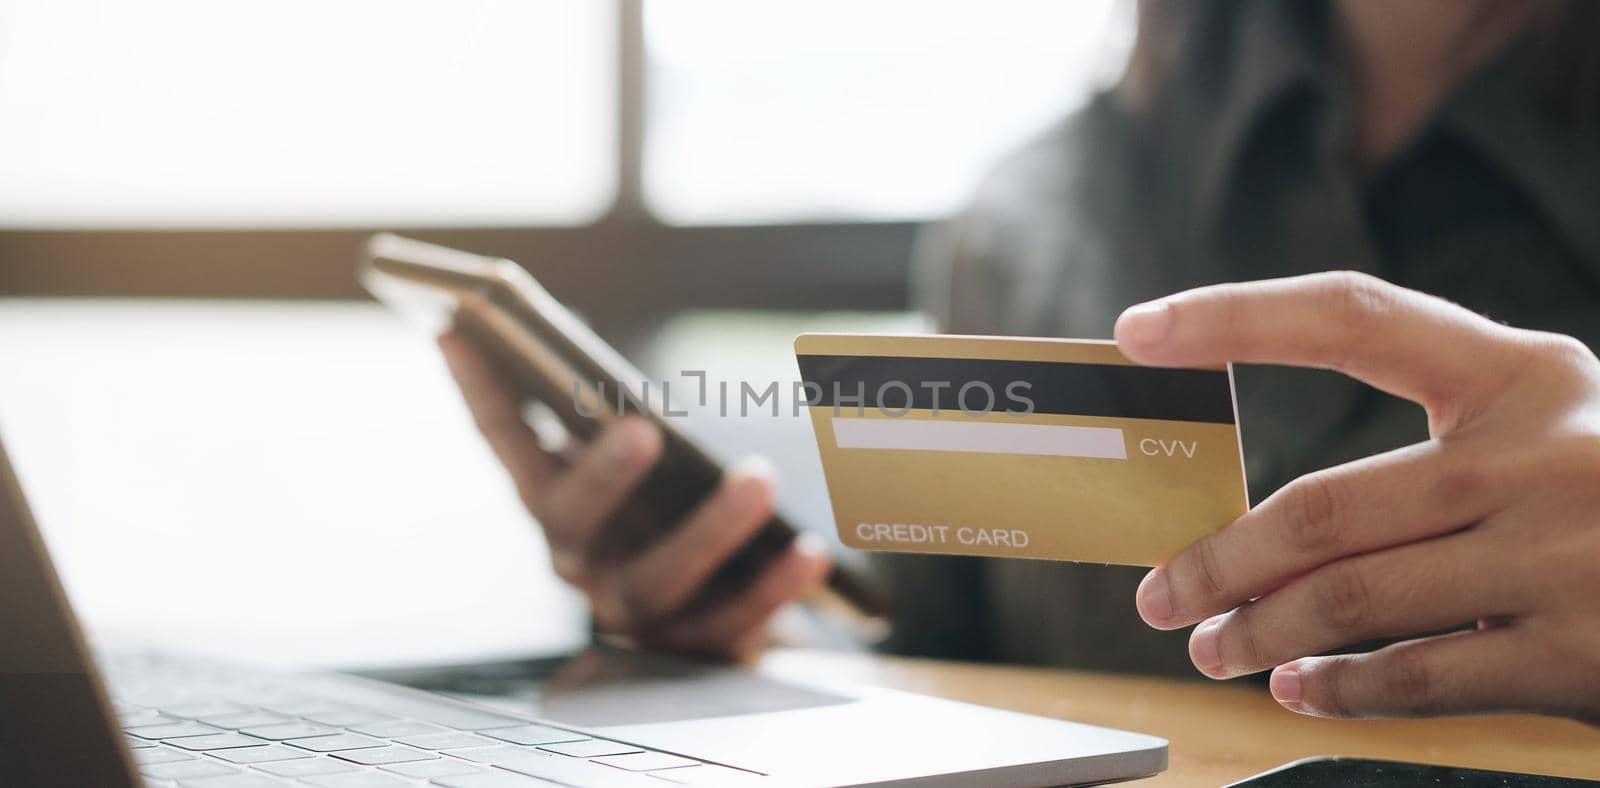 Hands holding credit card and using laptop. Online shopping	
